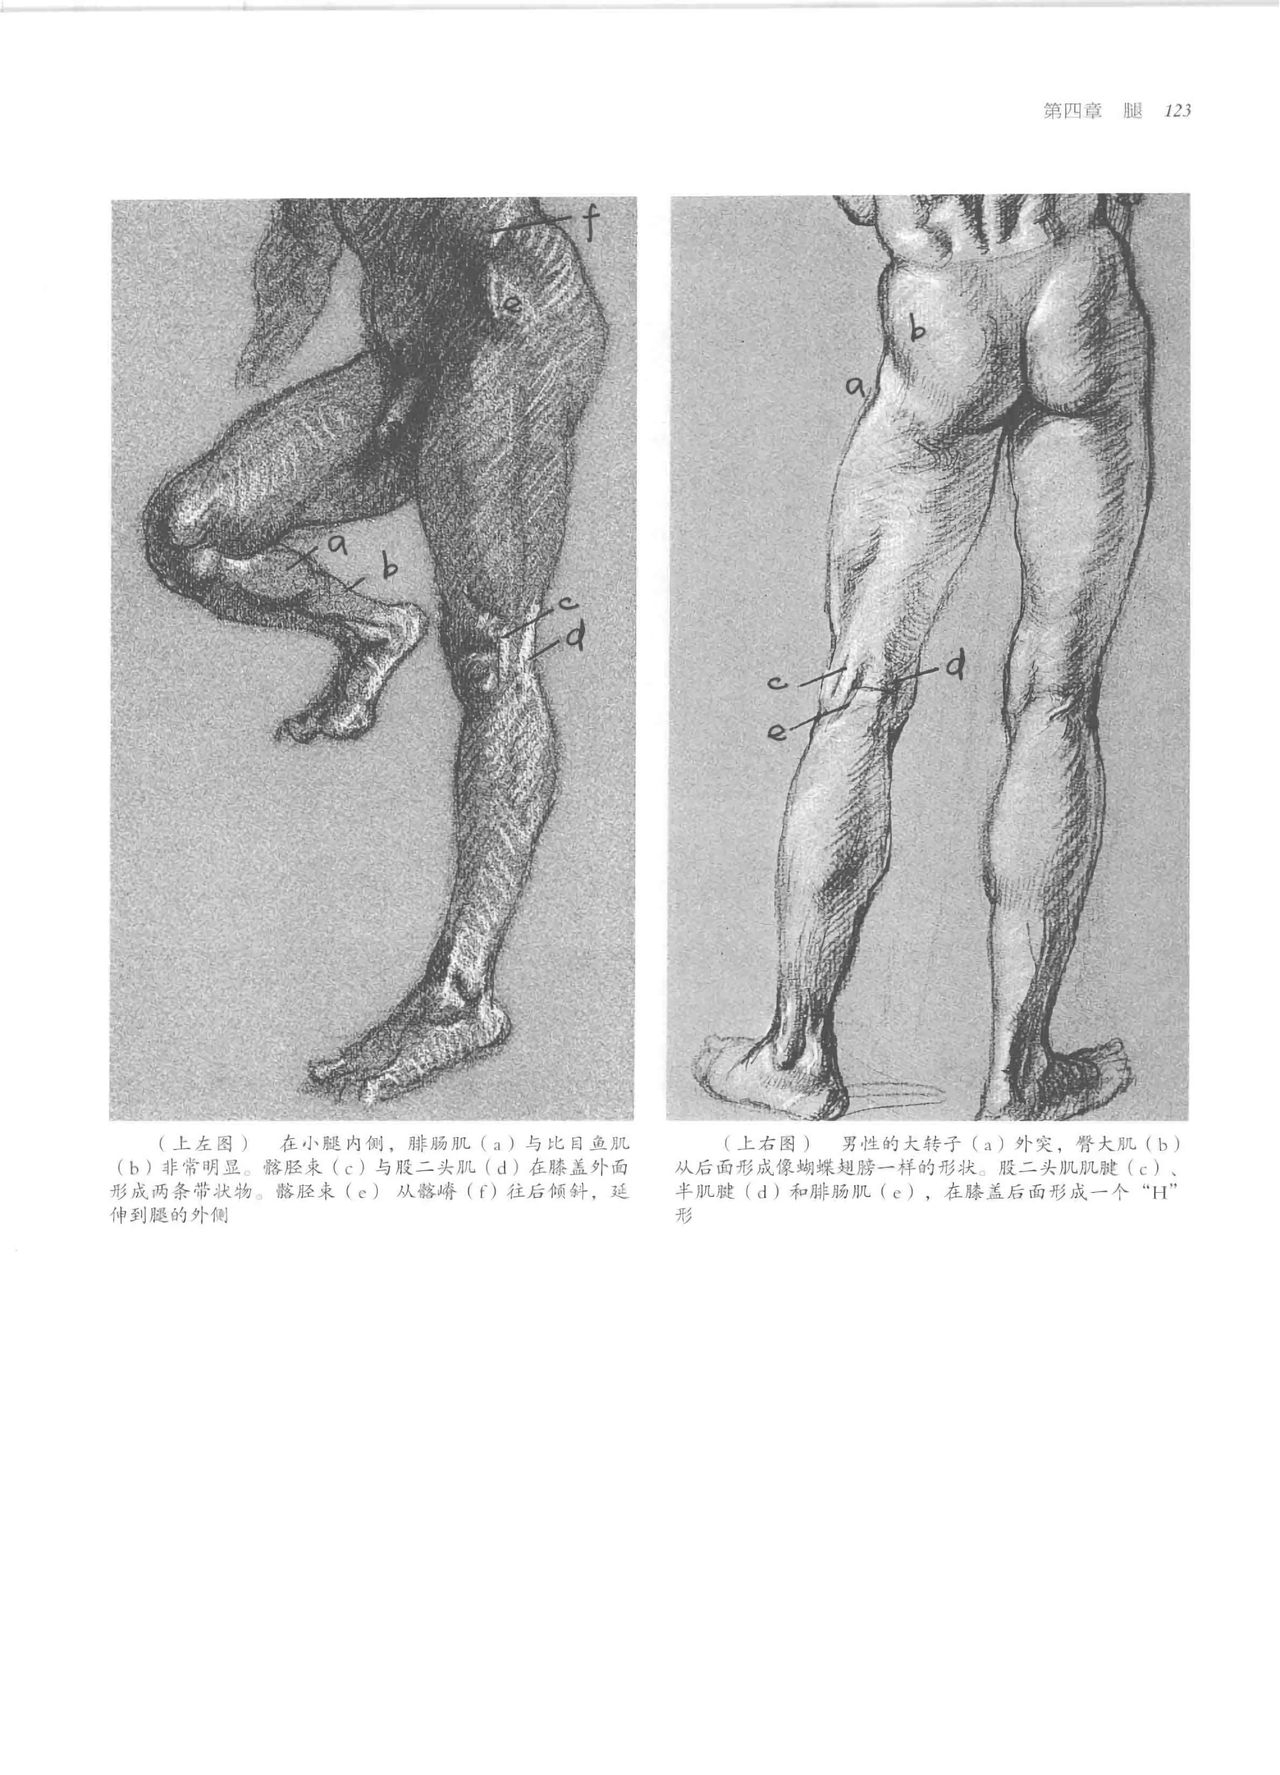 Anatomy-A Complete Guide for Artists - Joseph Sheppard [Chinese] 123